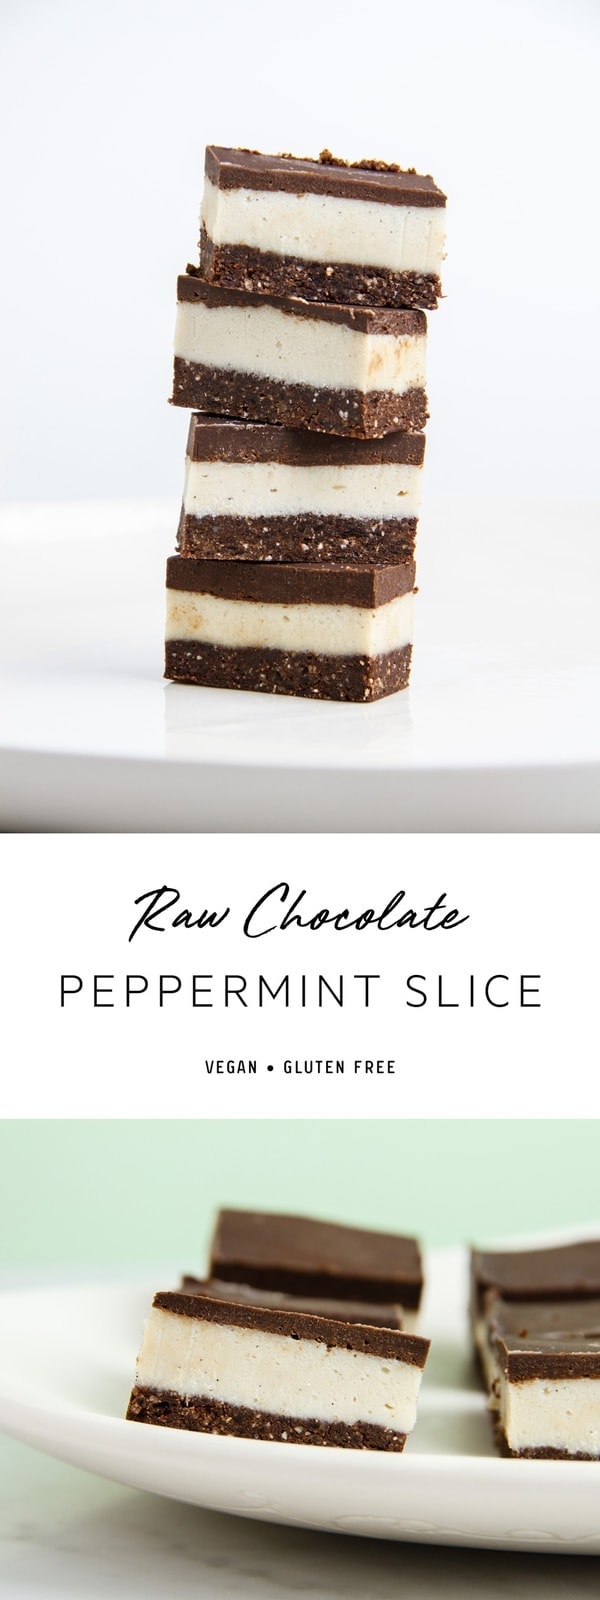 Raw Chocolate Peppermint Slice – a biscuit base with a creamy peppermint filling, topped with a thick raw chocolate spread. #dessertideas #unbake #slices #dairyfree #glutenfree #veganslice #veganrecipe #vegandesserts #peppermintrecipes #doterra #doterrarecipes #peppermintslice #AscensionKitchen